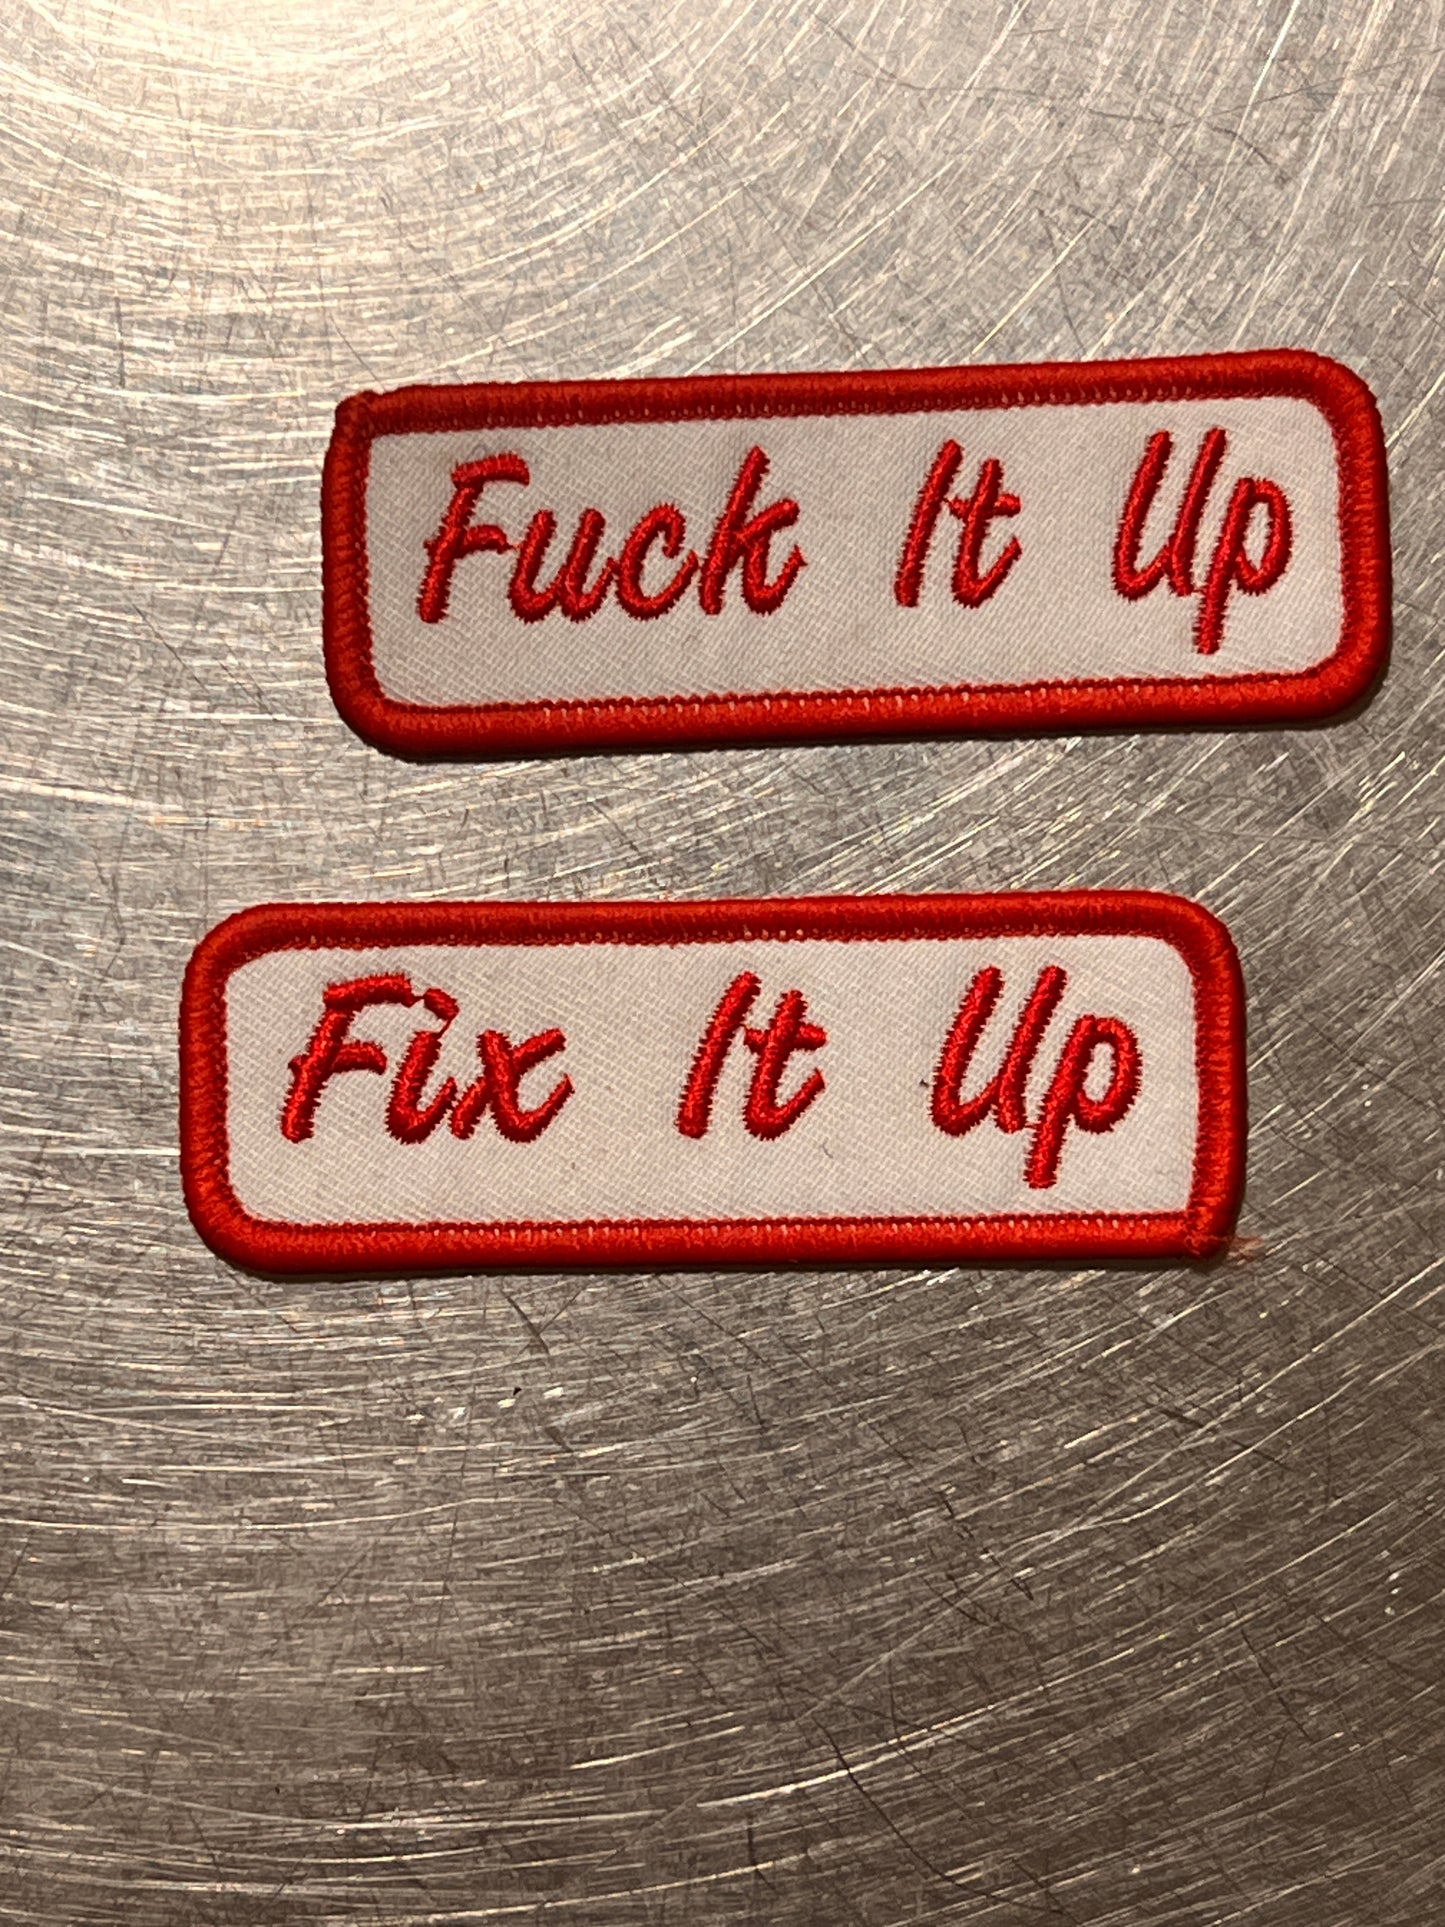 ‘Fix It Up/Fuck It Up’ pair of two embroidered patches